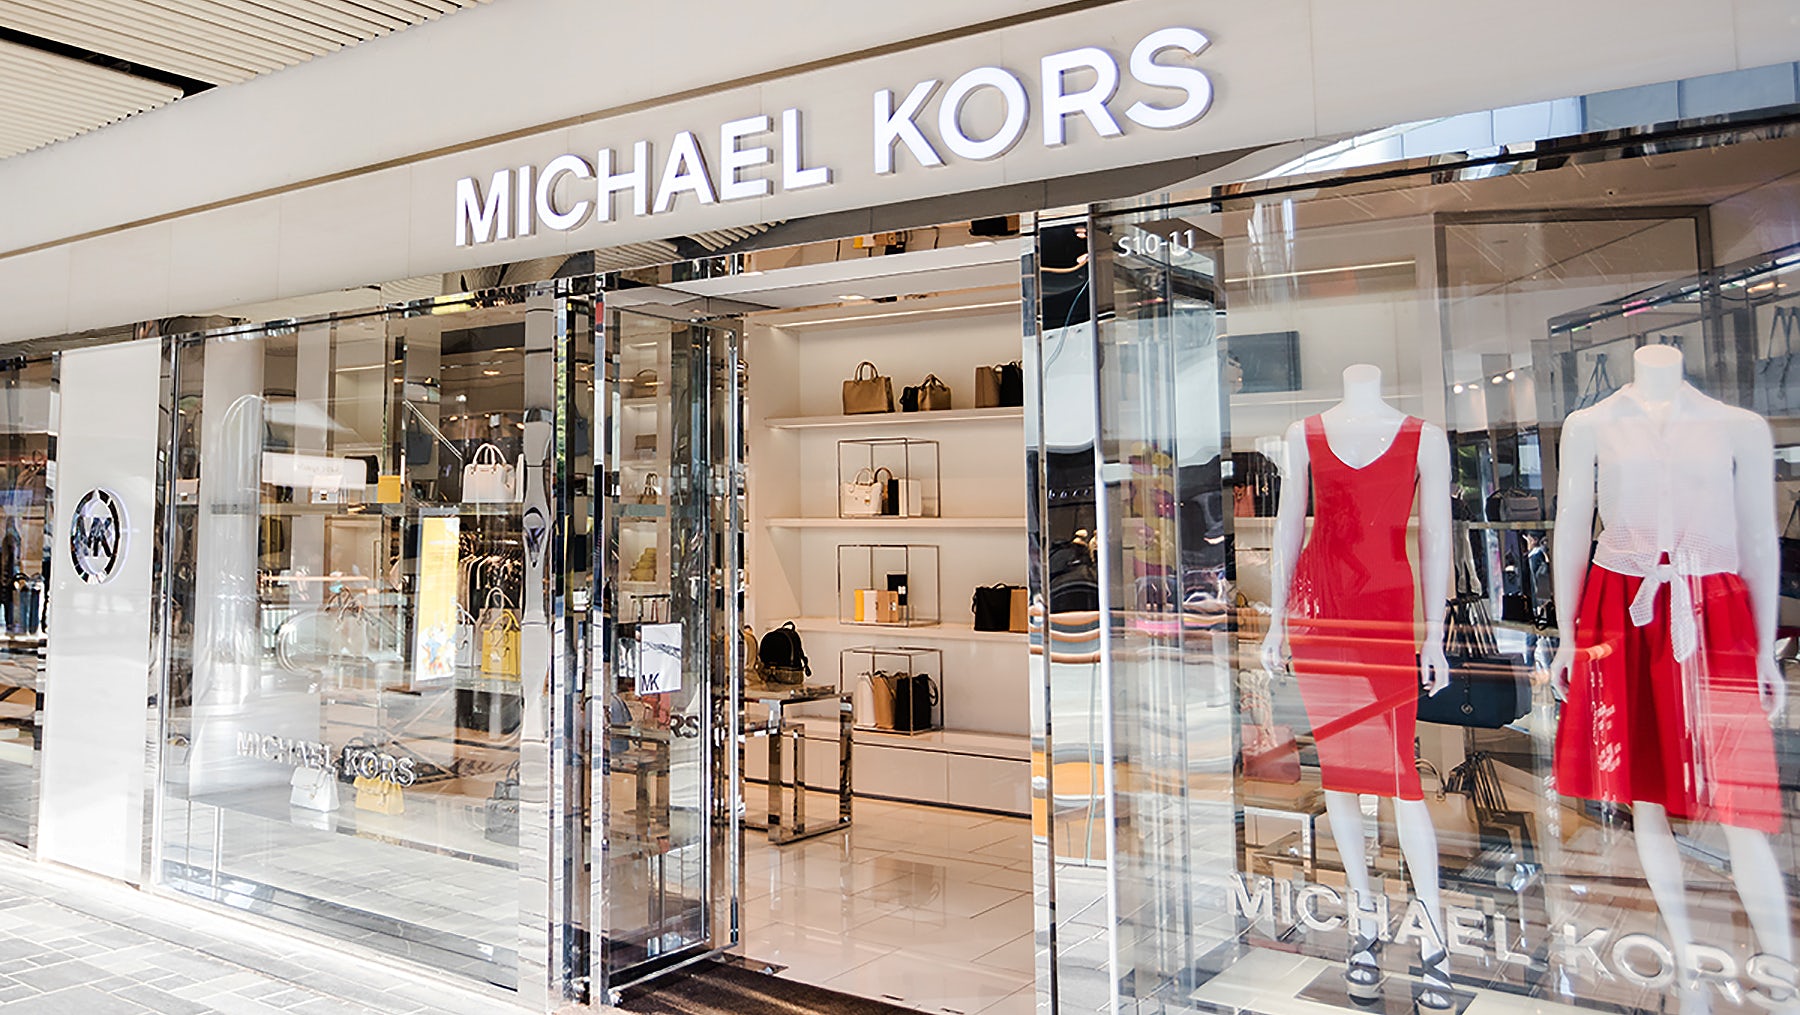 Michael Kors is fed up with department stores damaging its brand